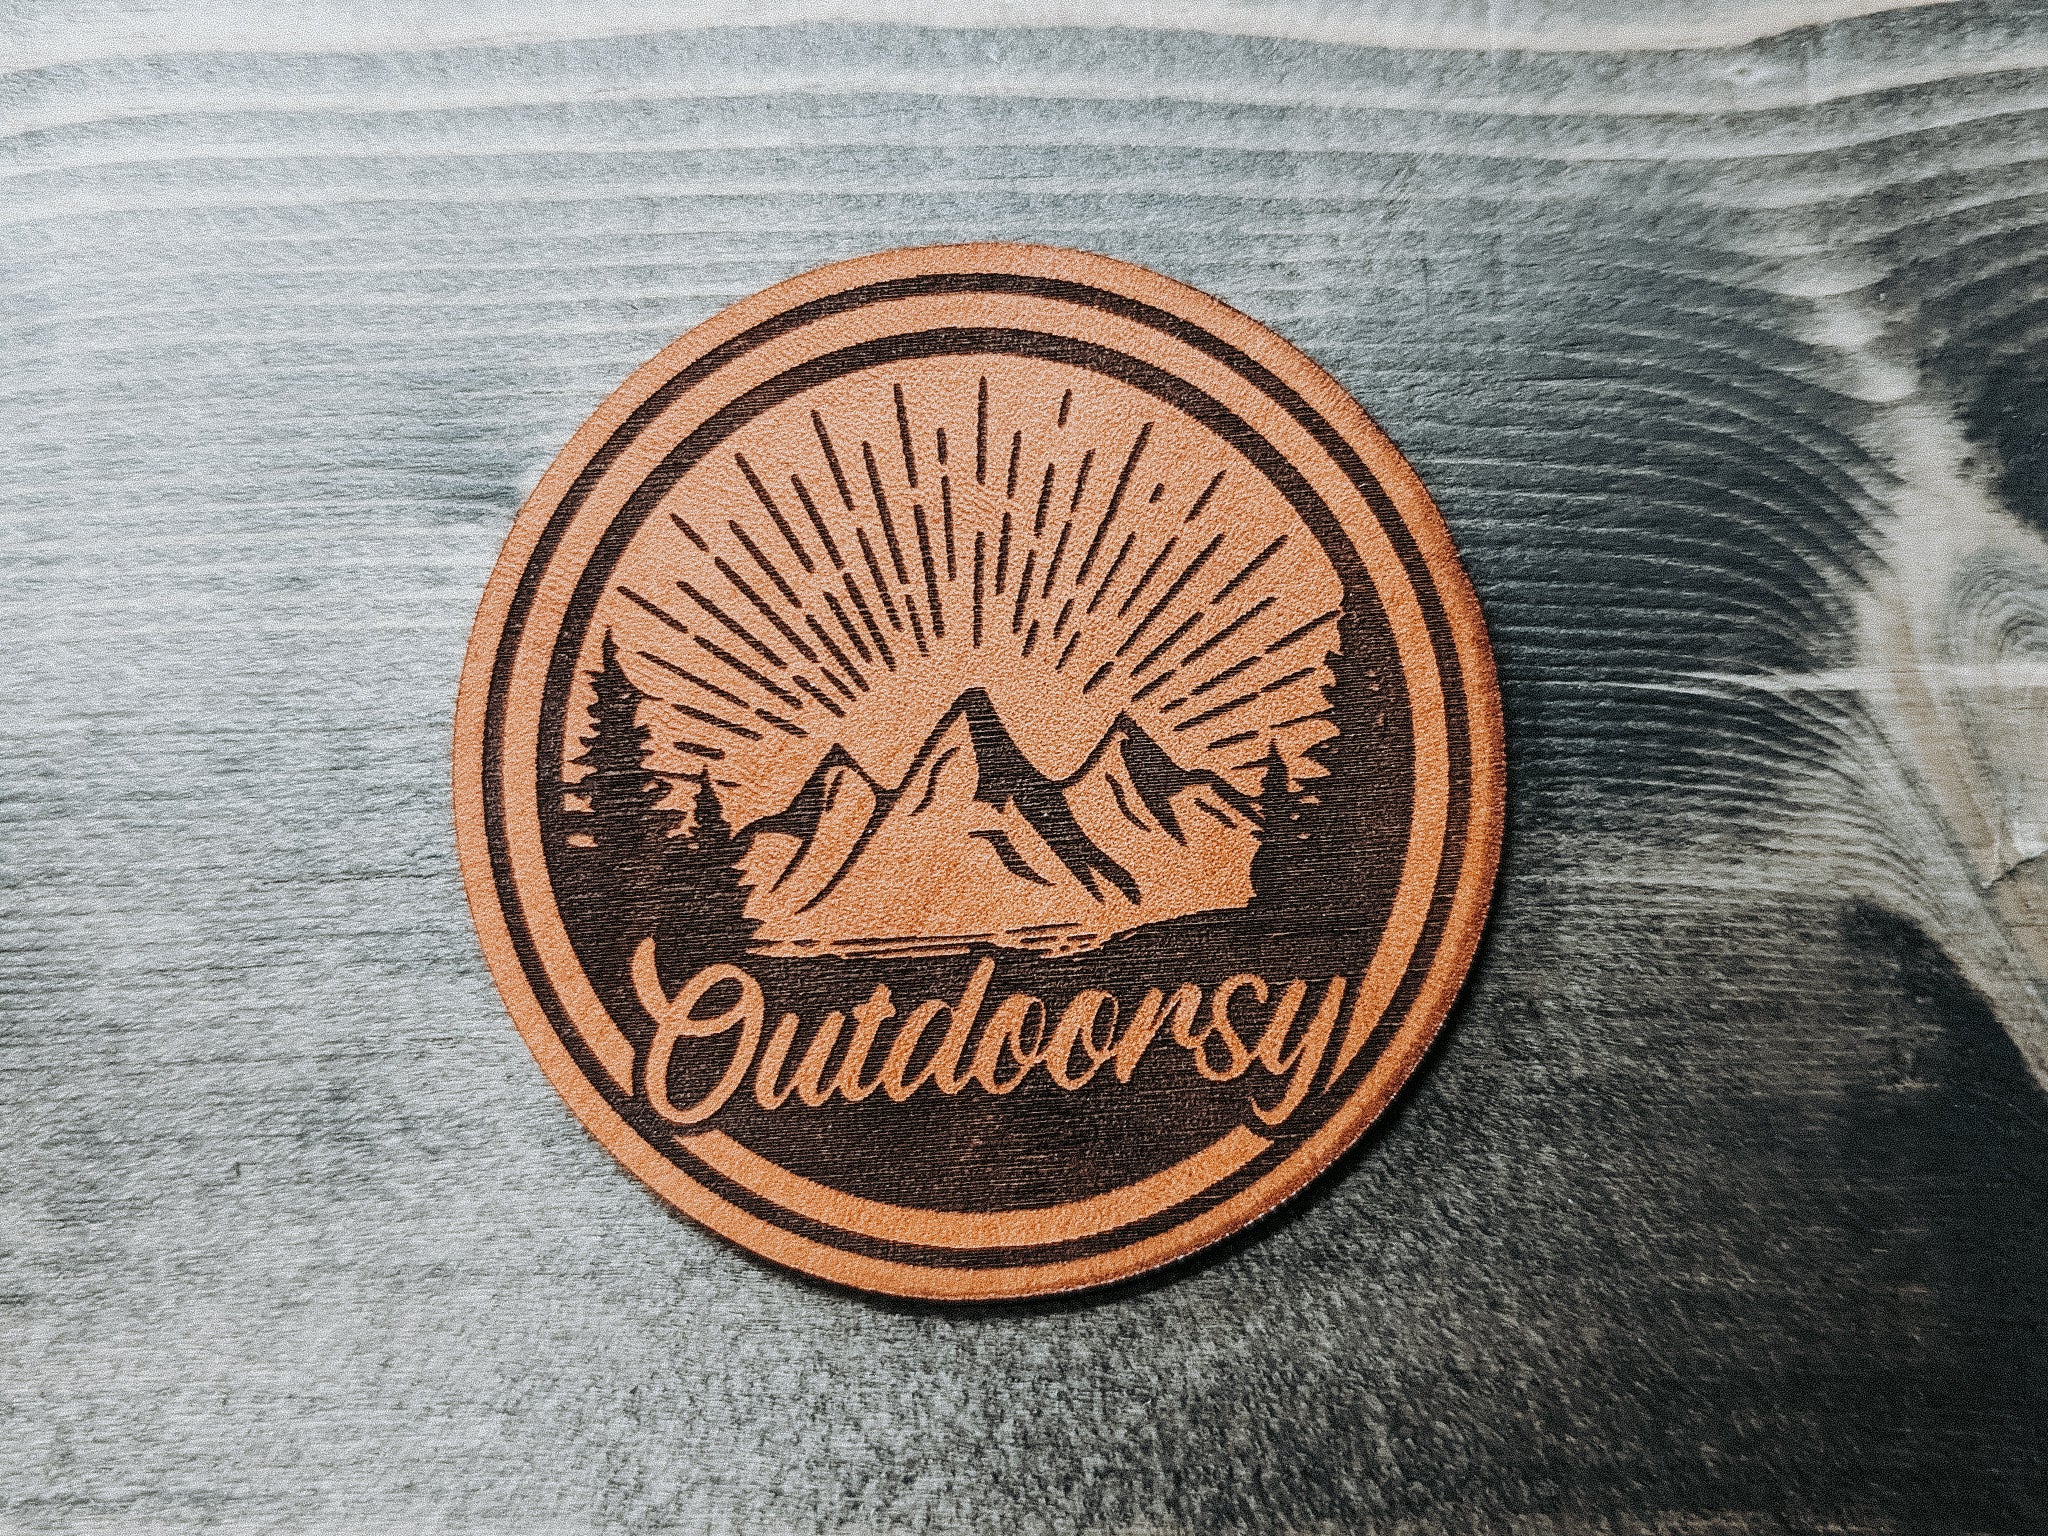 Trucker Hat Leather Patch: Outdoorsy Bison - Wyo Dirt Customs